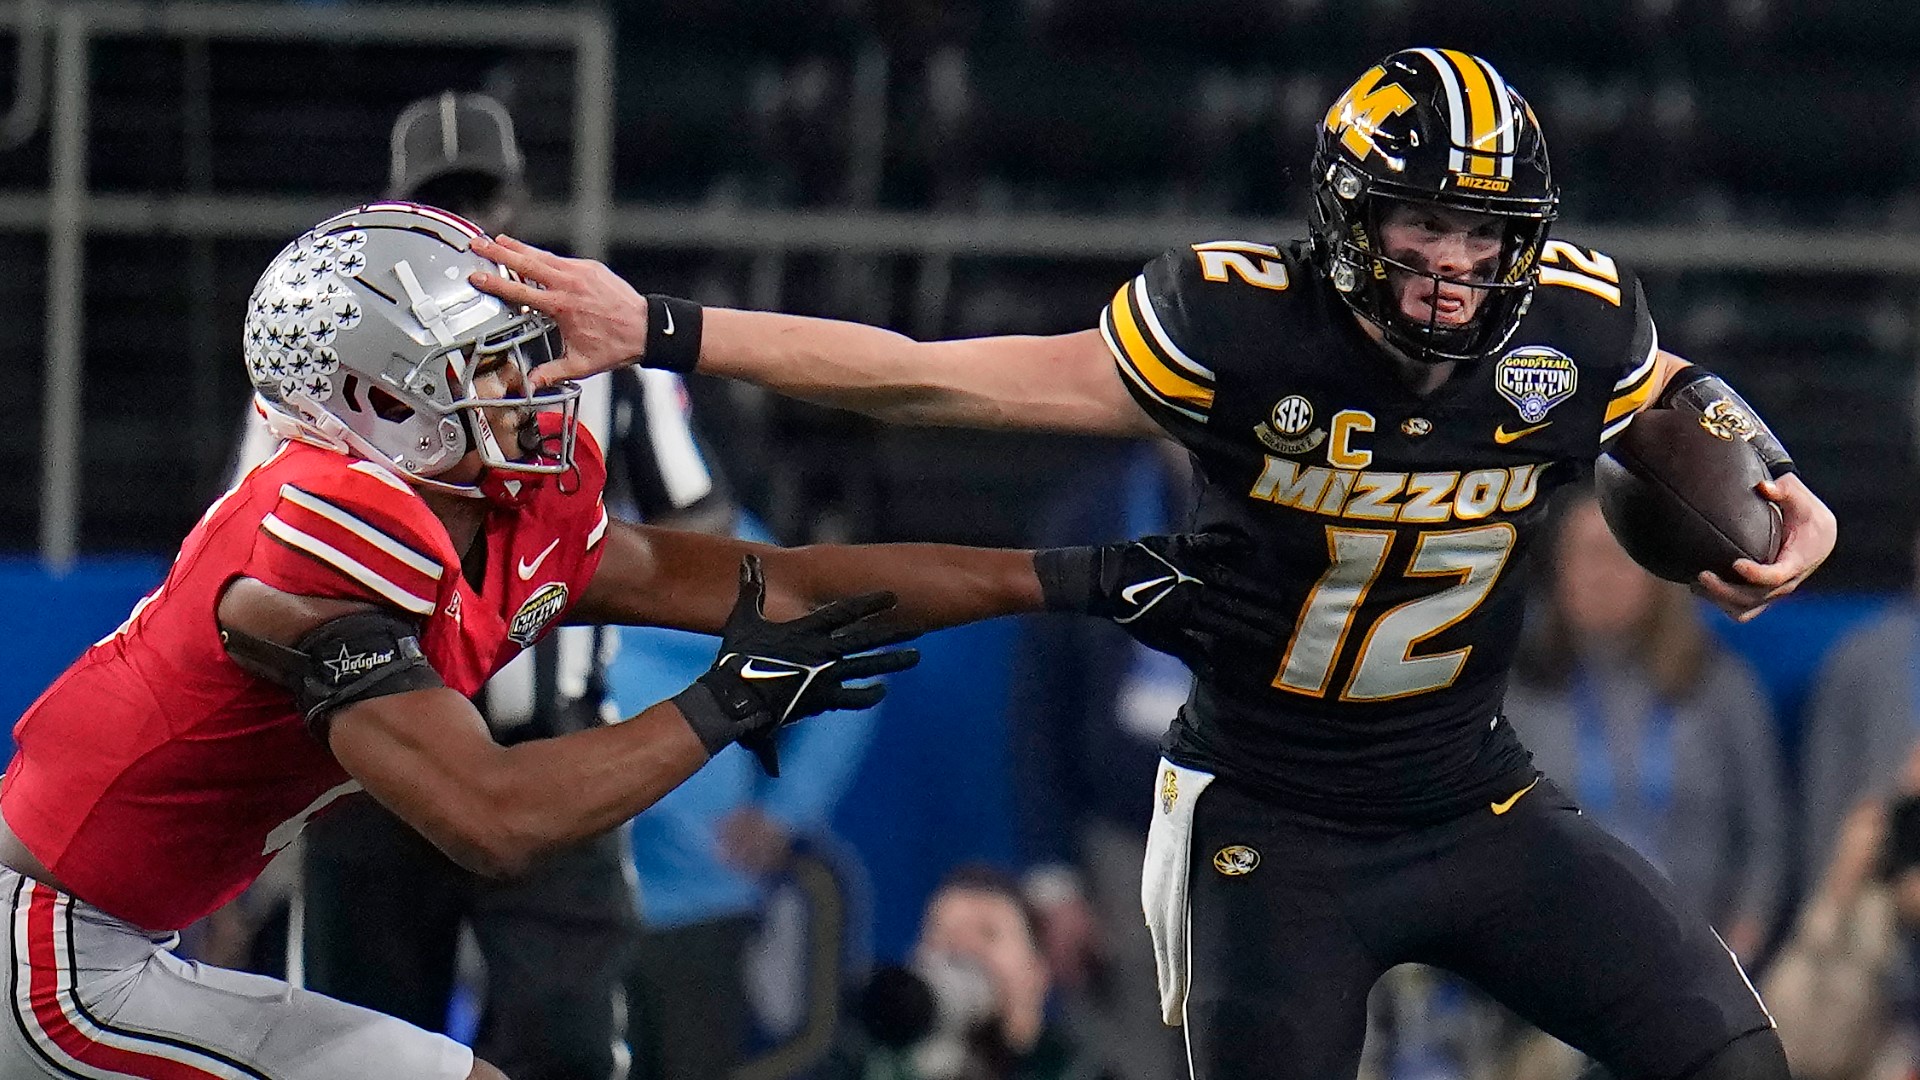 No. 9 Missouri took down No. 7 Ohio State 14-3 in the 88th Cotton Bowl Classic at AT&T Stadium in Arlington thanks to strong defense and 4th quarter offense.